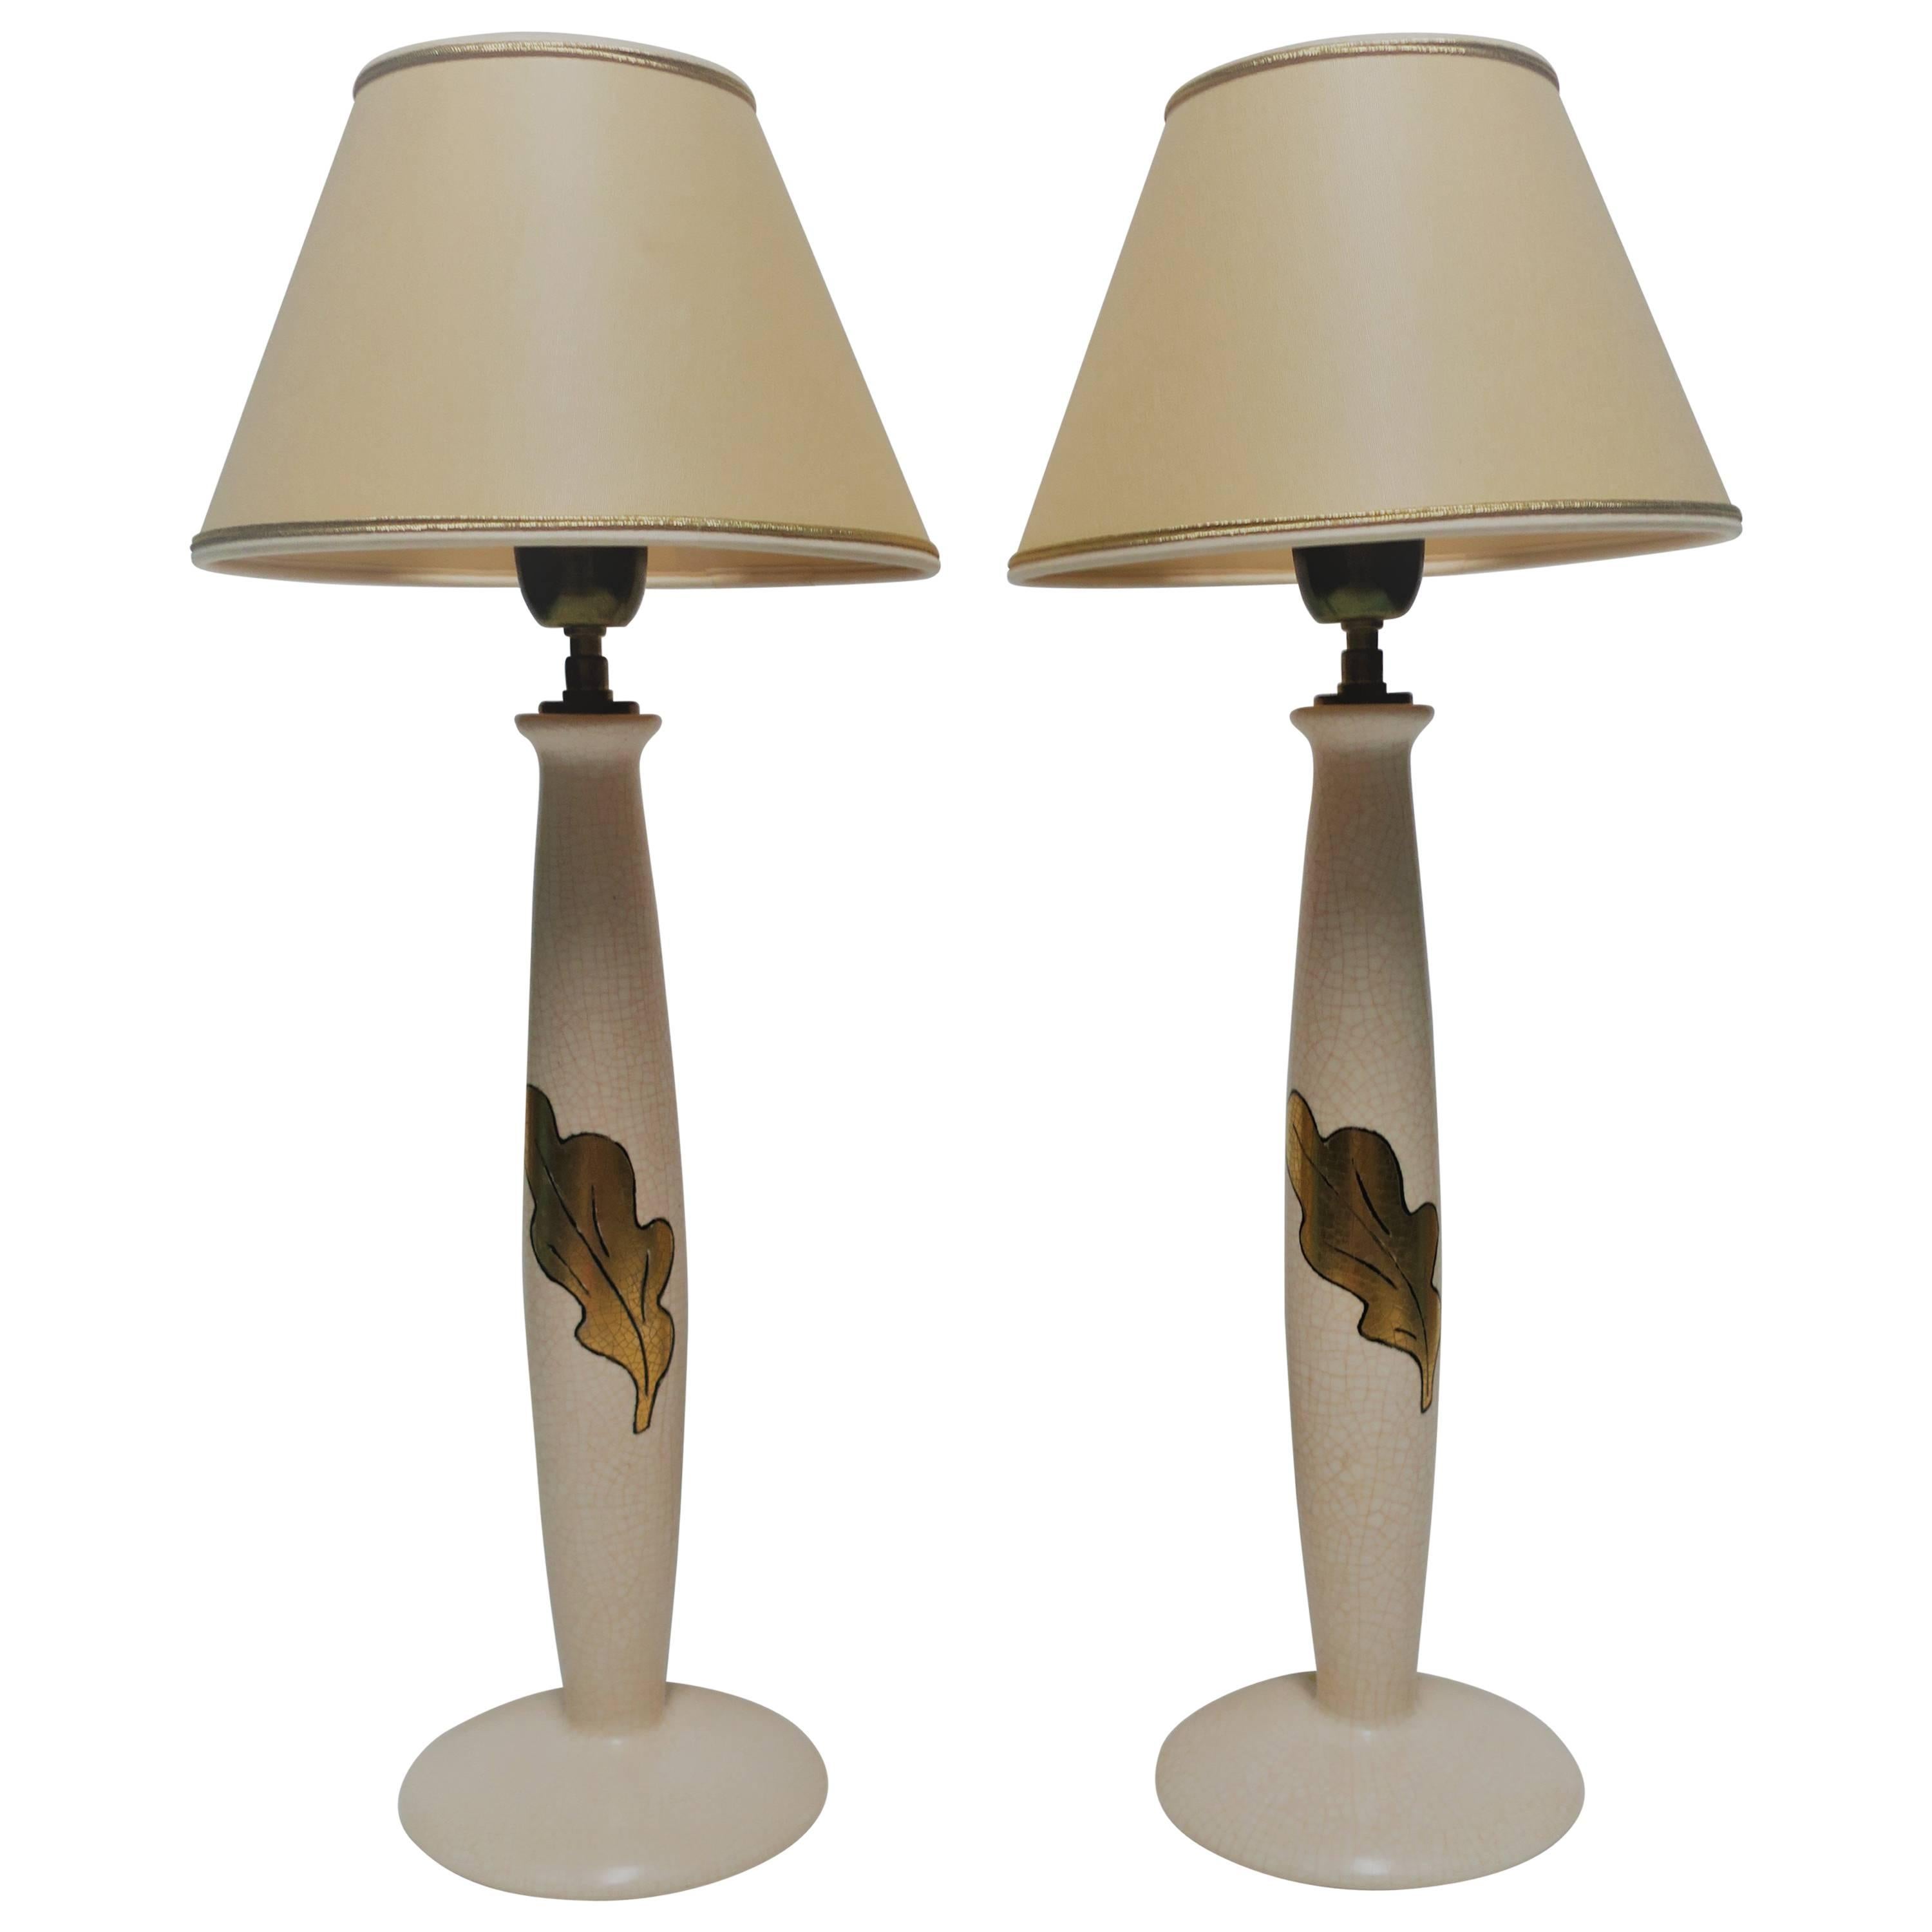 French Ceramic Desk or Table Lamps with Gold Acanthus Leaf, Pair